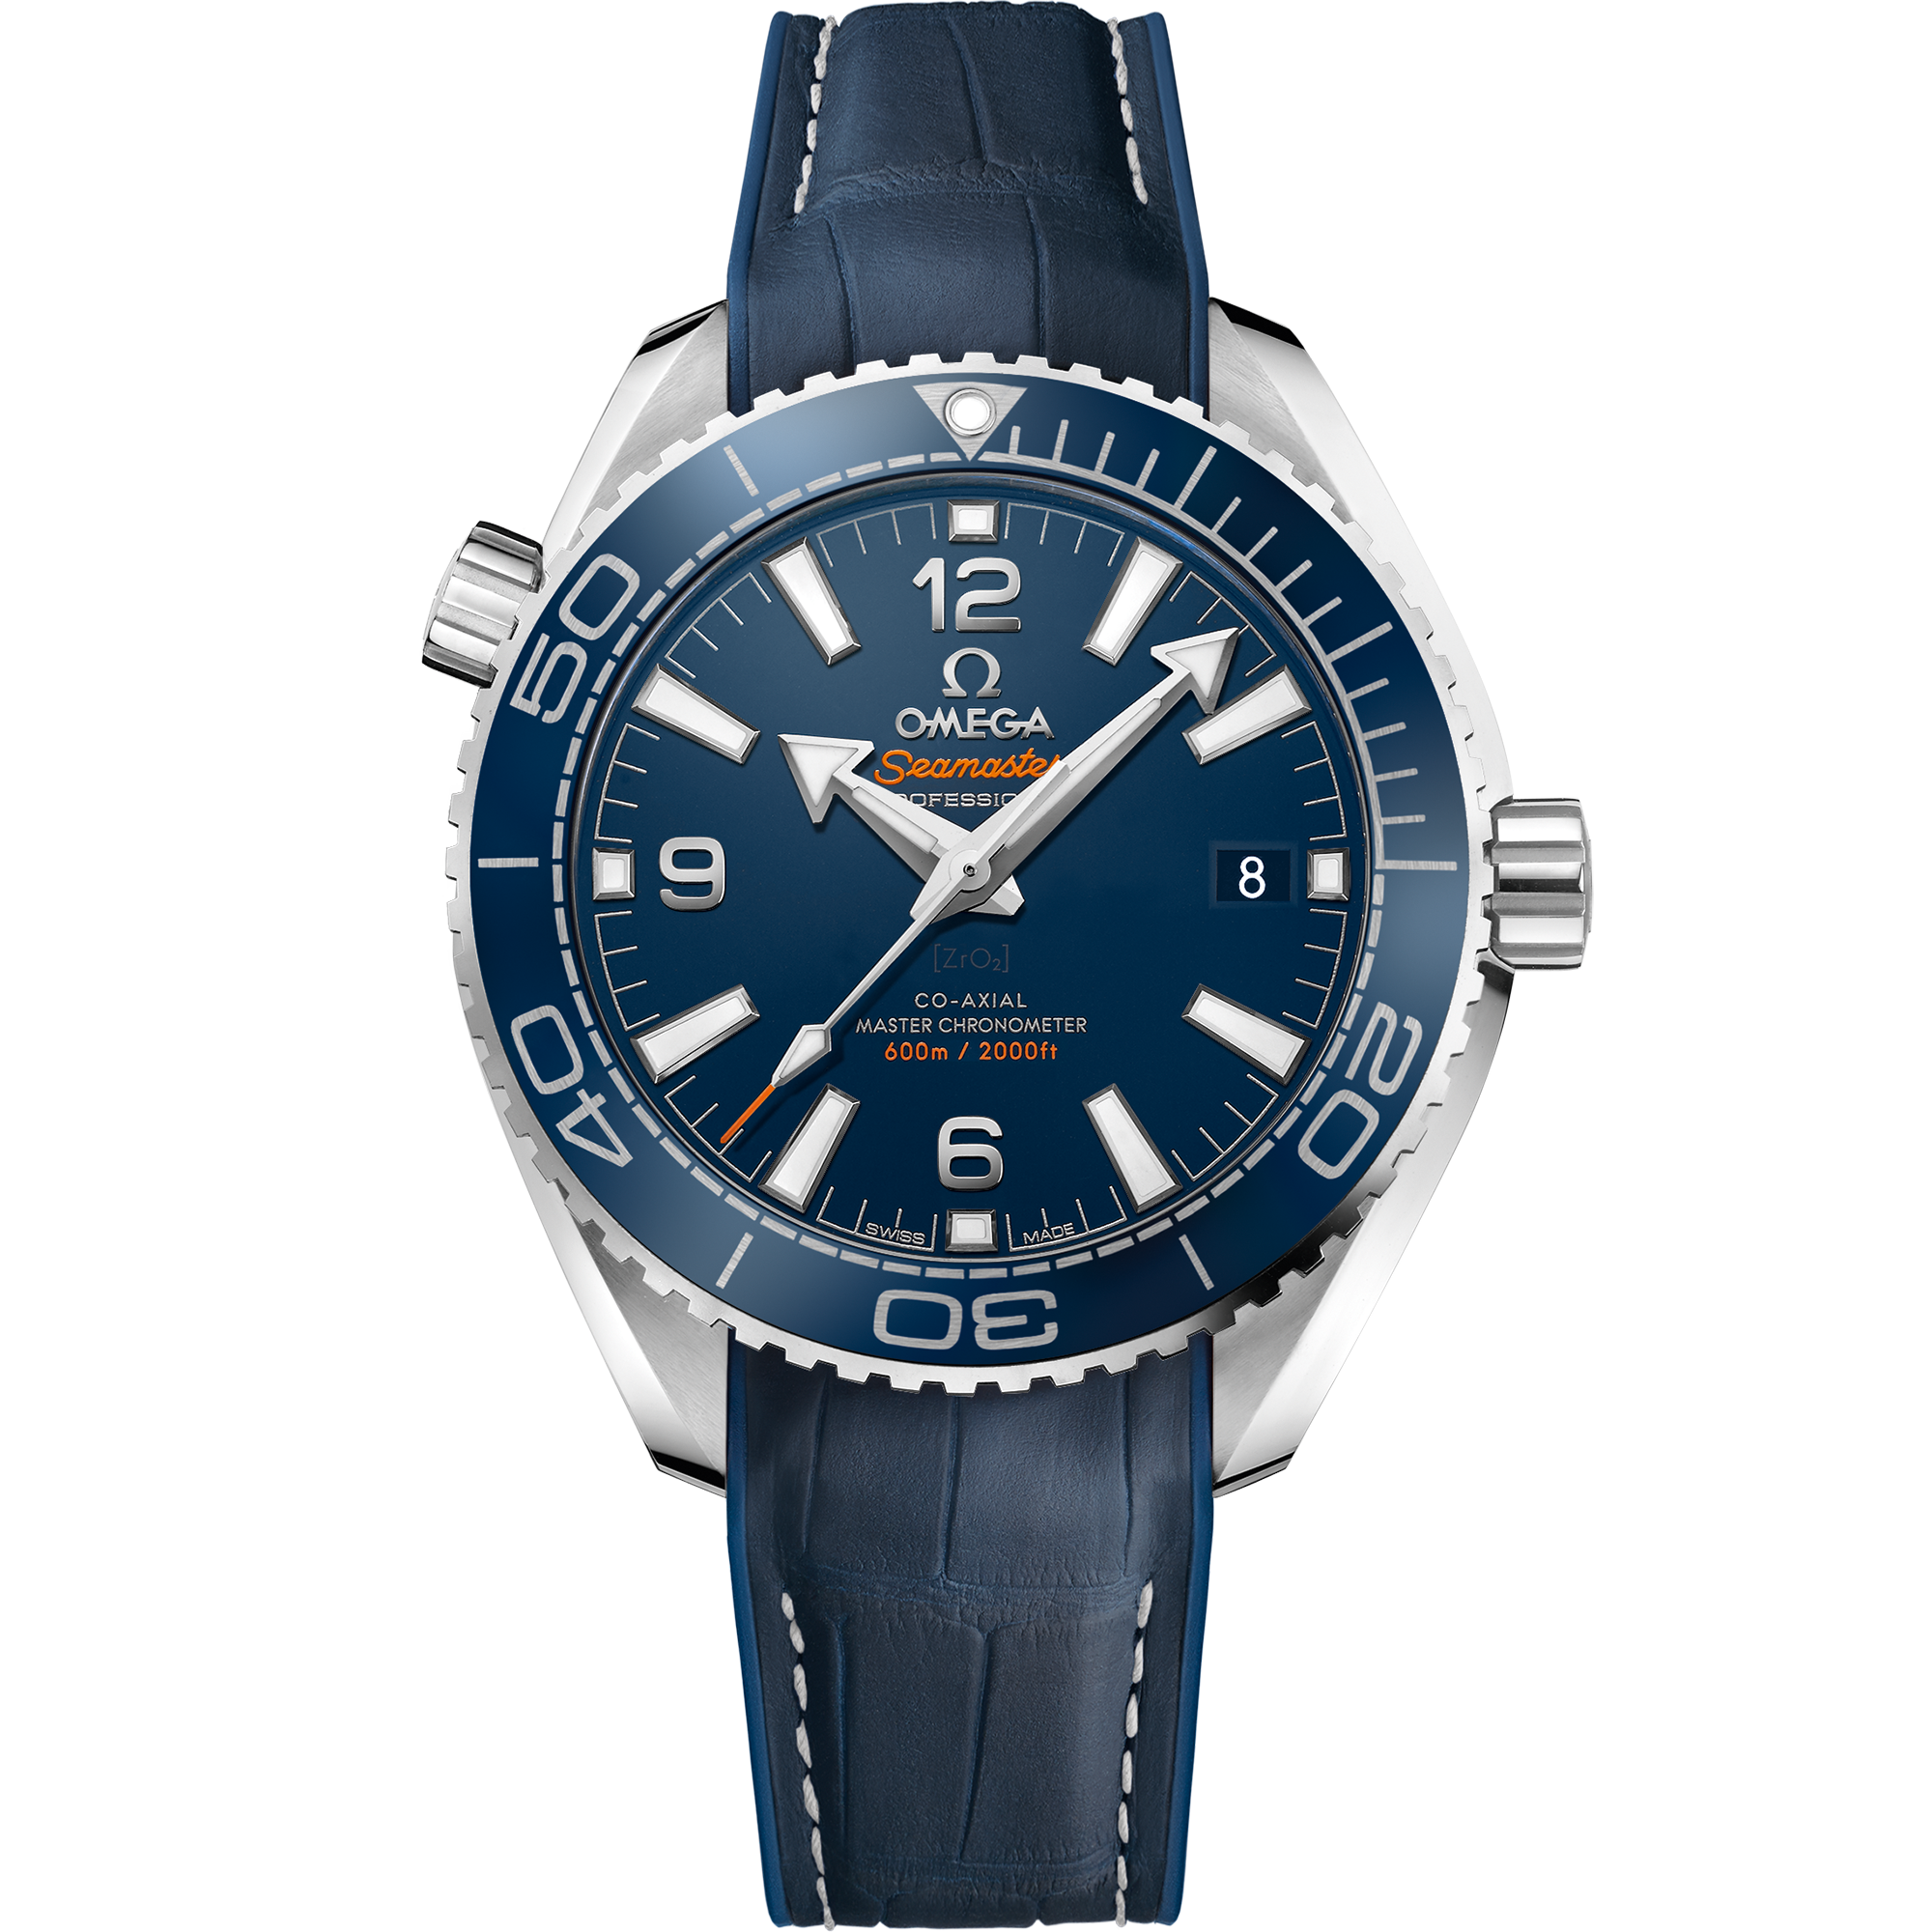 Seamaster 39.5 mm, steel on leather strap with rubber lining - 215.33.40.20.03.001